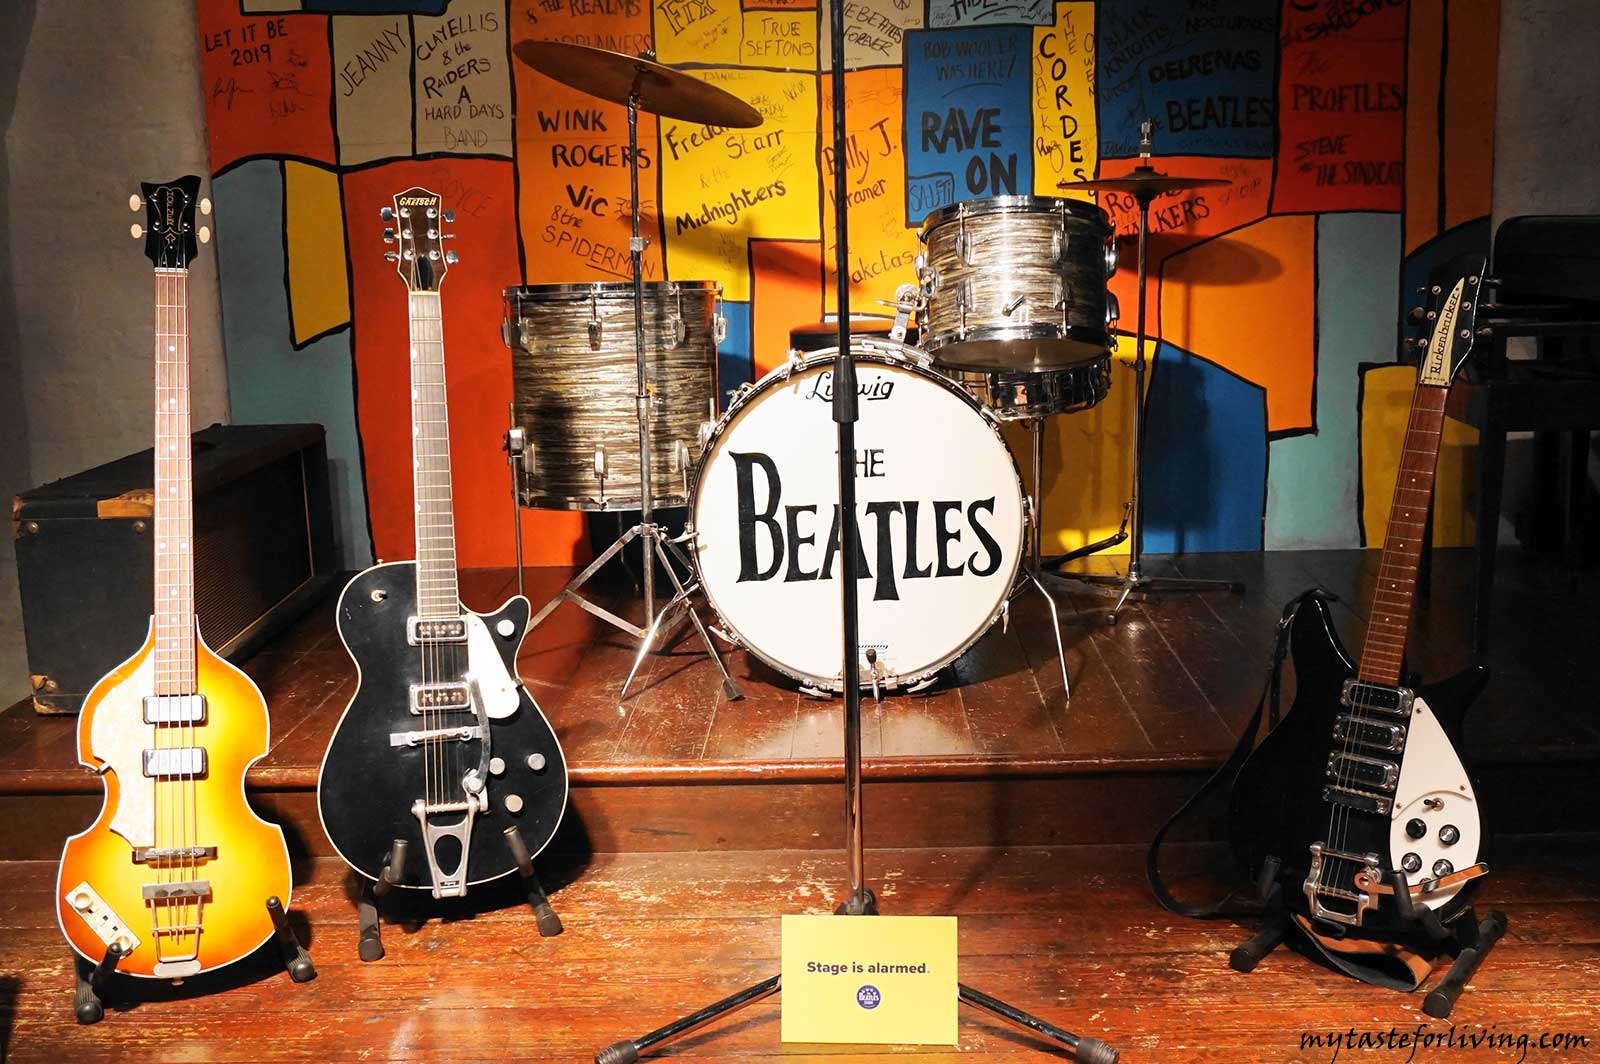 The Beatles Story is located in Liverpool, UK, on the historical Royal Albert Dock. The exhibition is entirely dedicated to the legendary band and will immerse you in the times, culture and music of the Beatles.